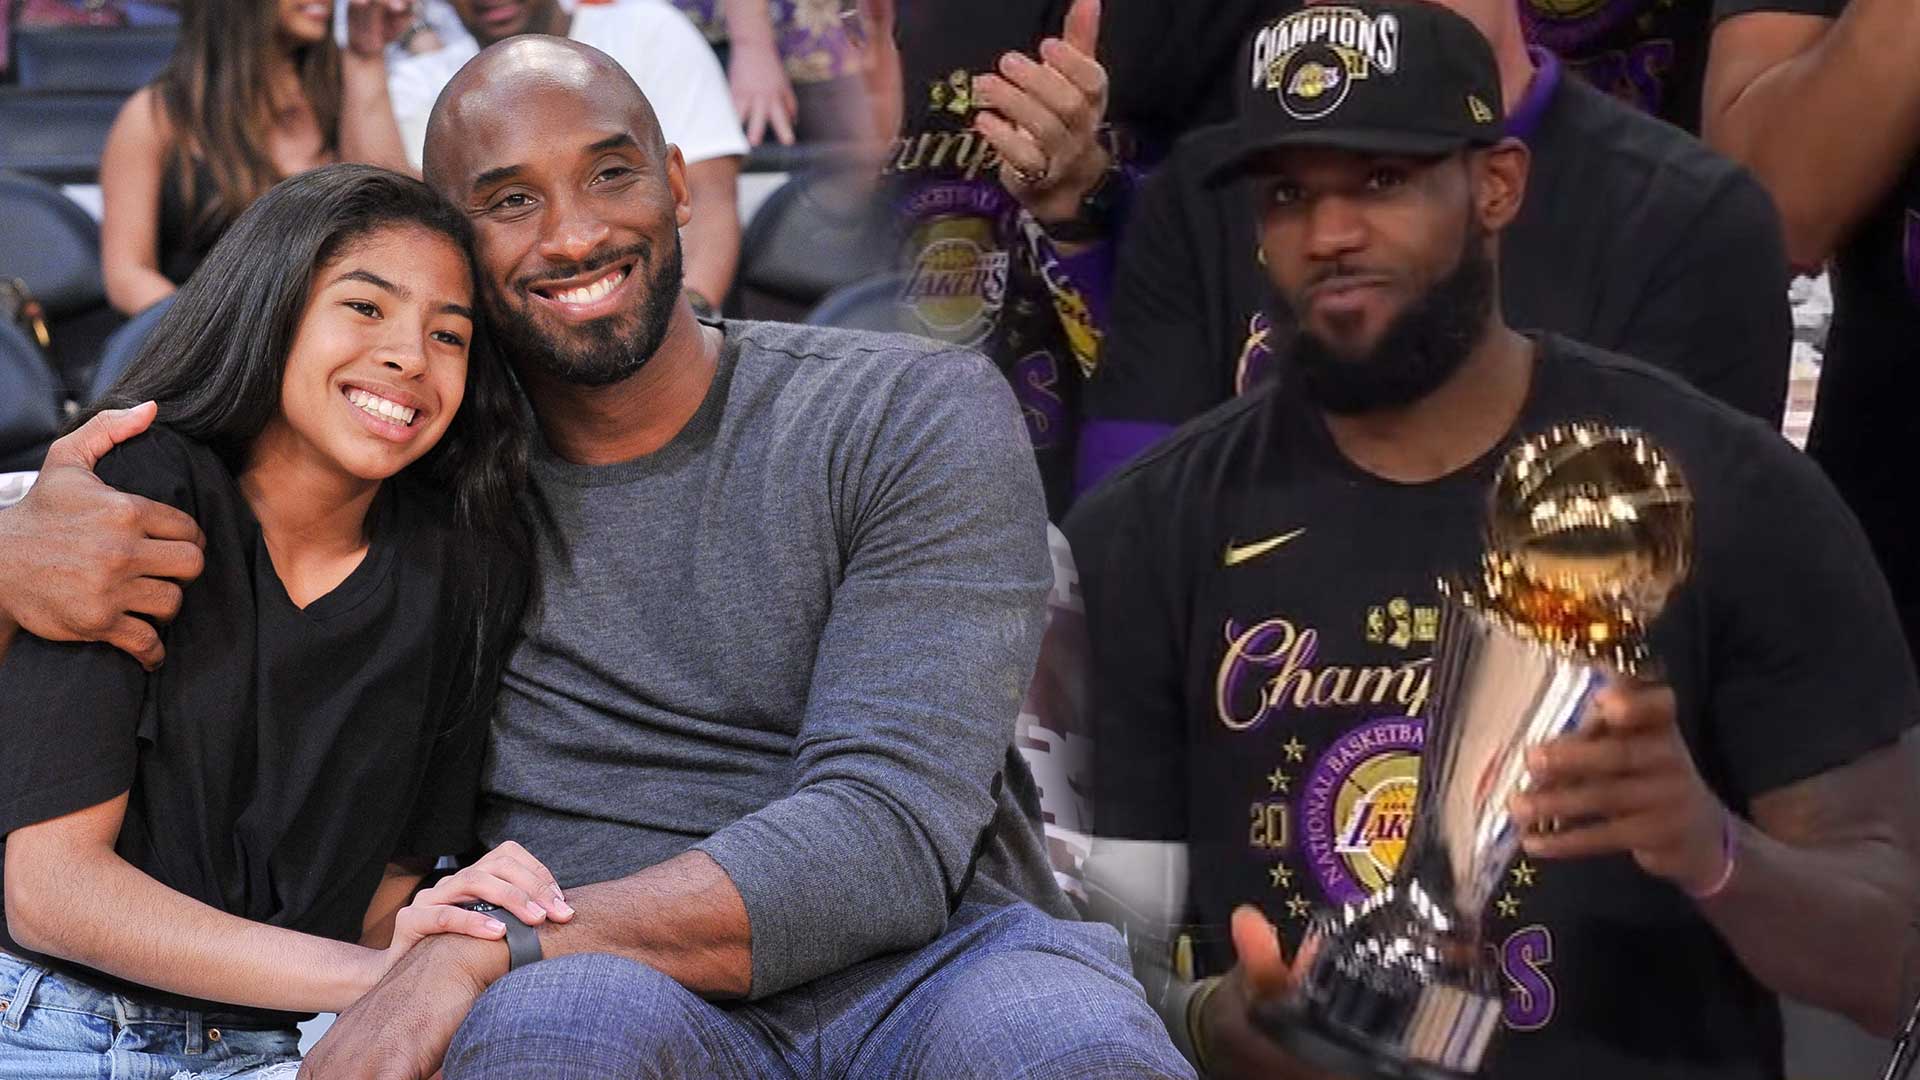 Black Mamba jerseys approved: Vanessa Bryant elated to see Lakers